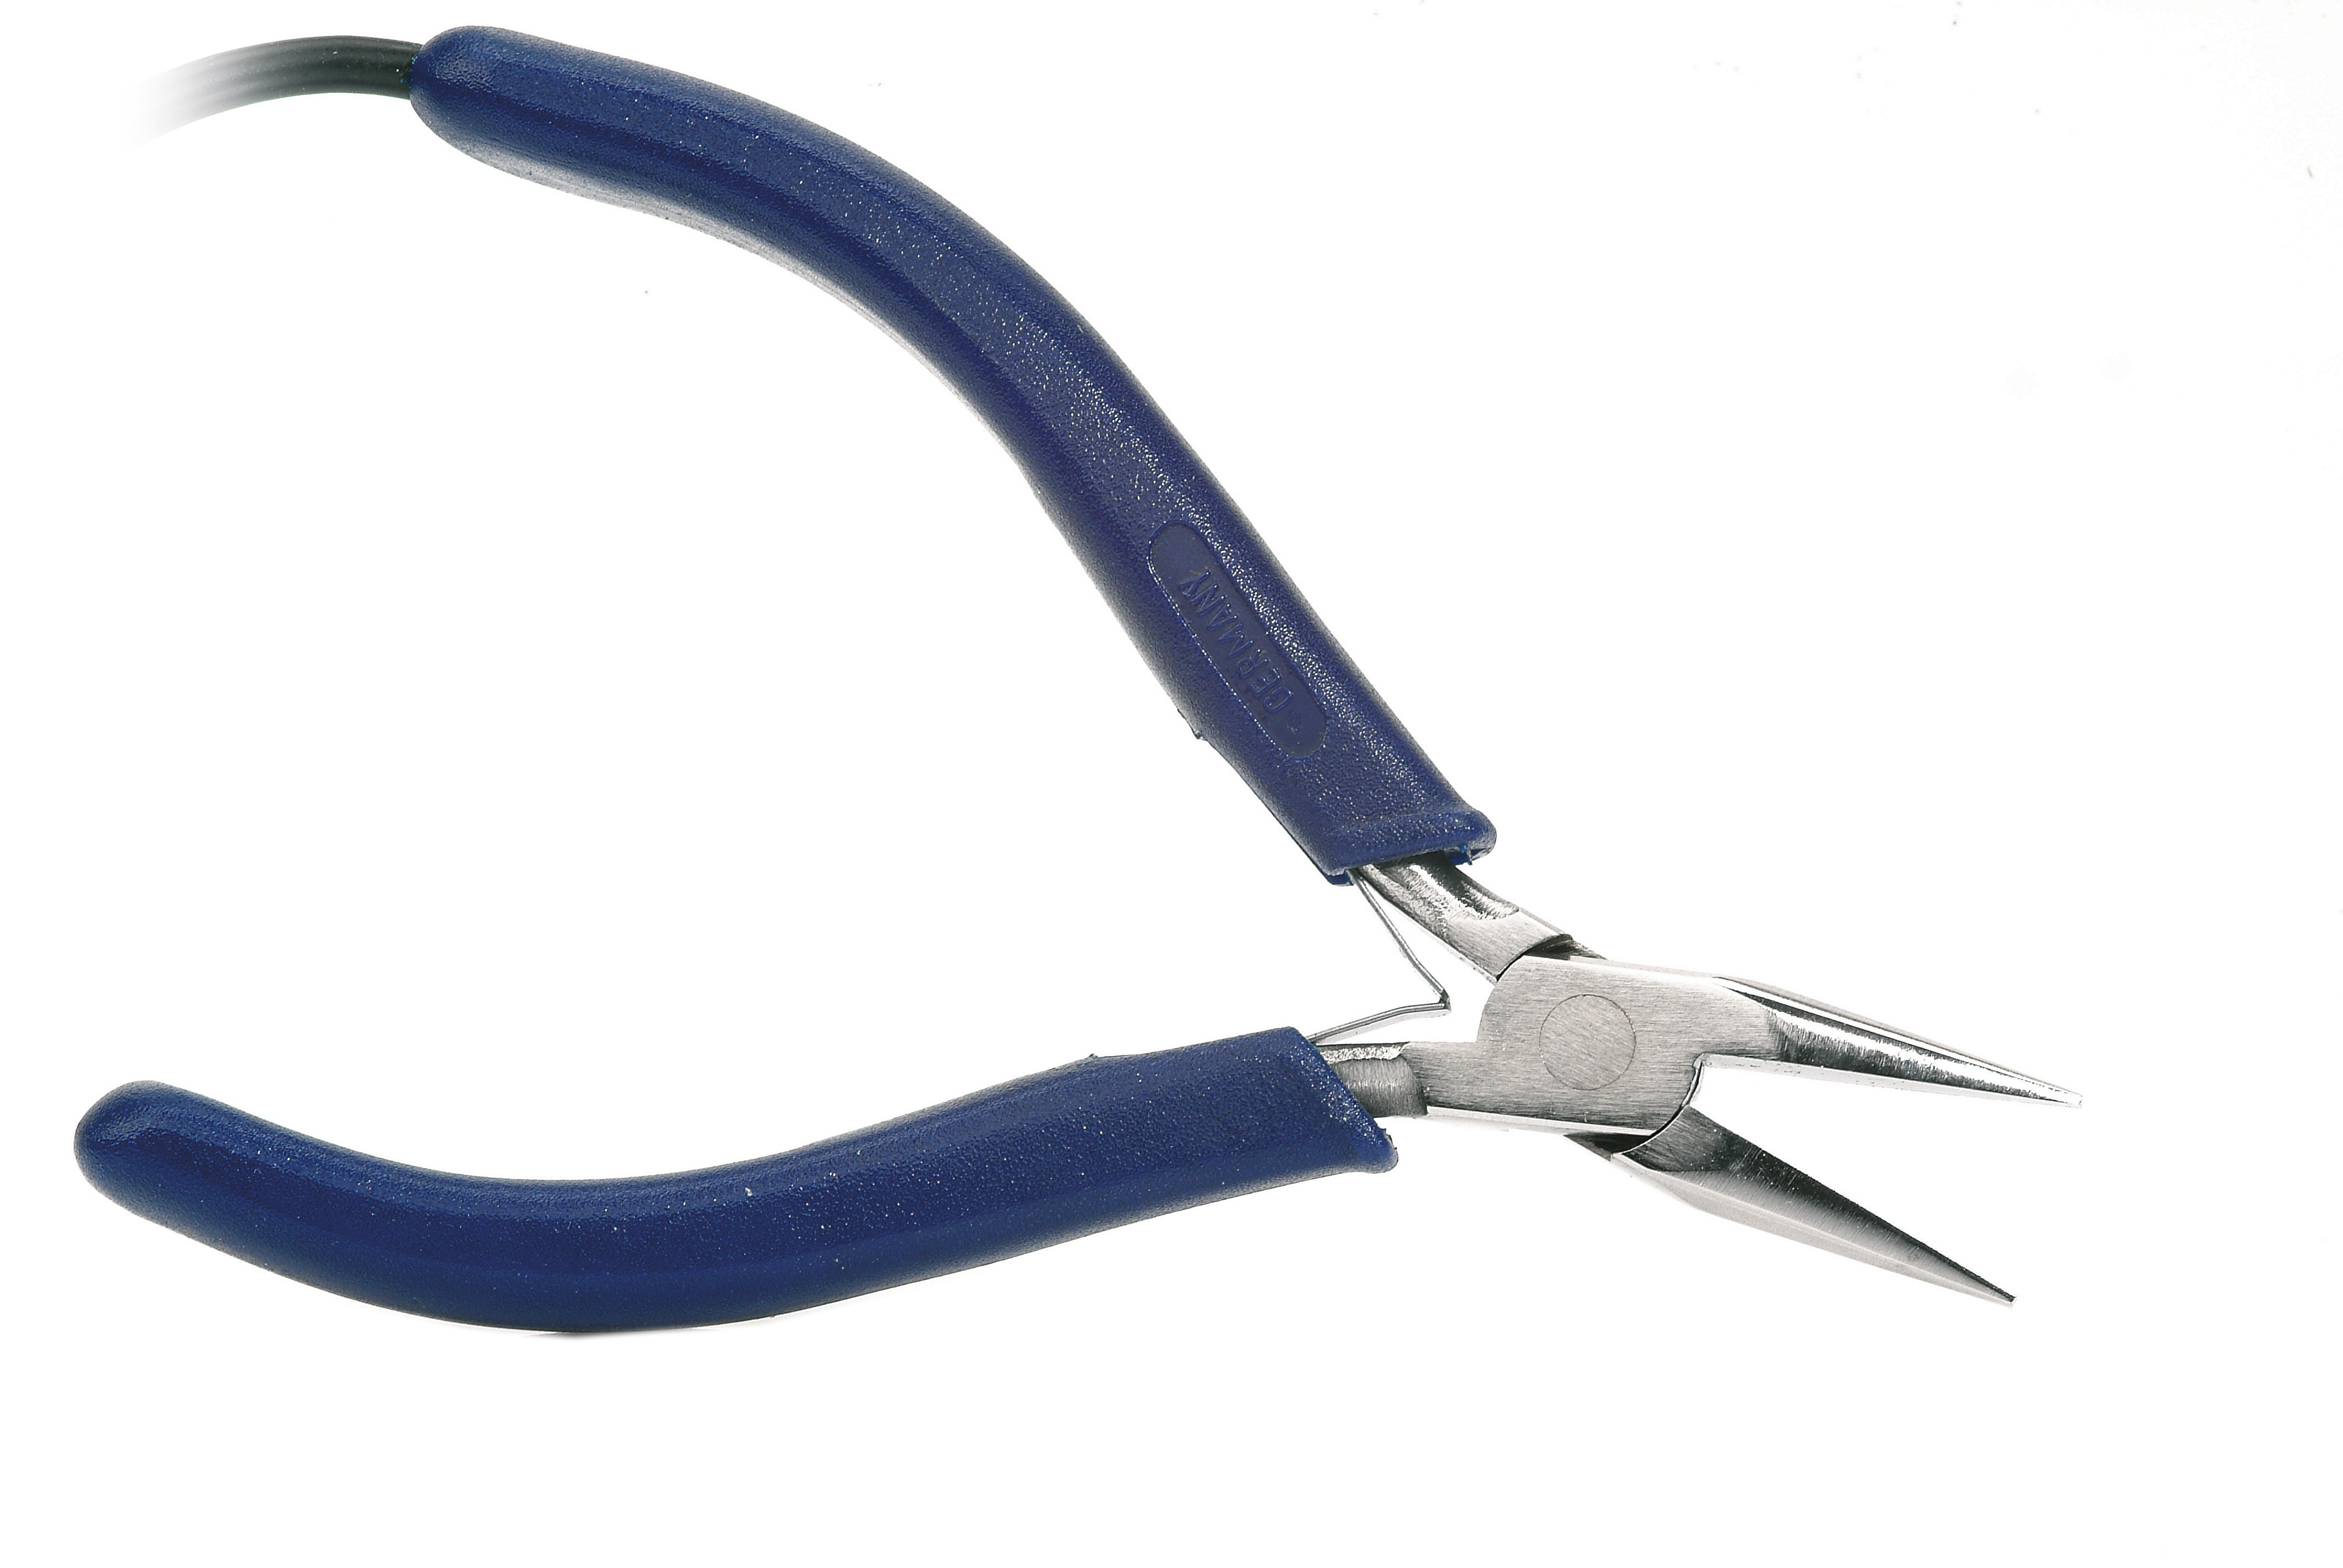 Warding pliers for PUK